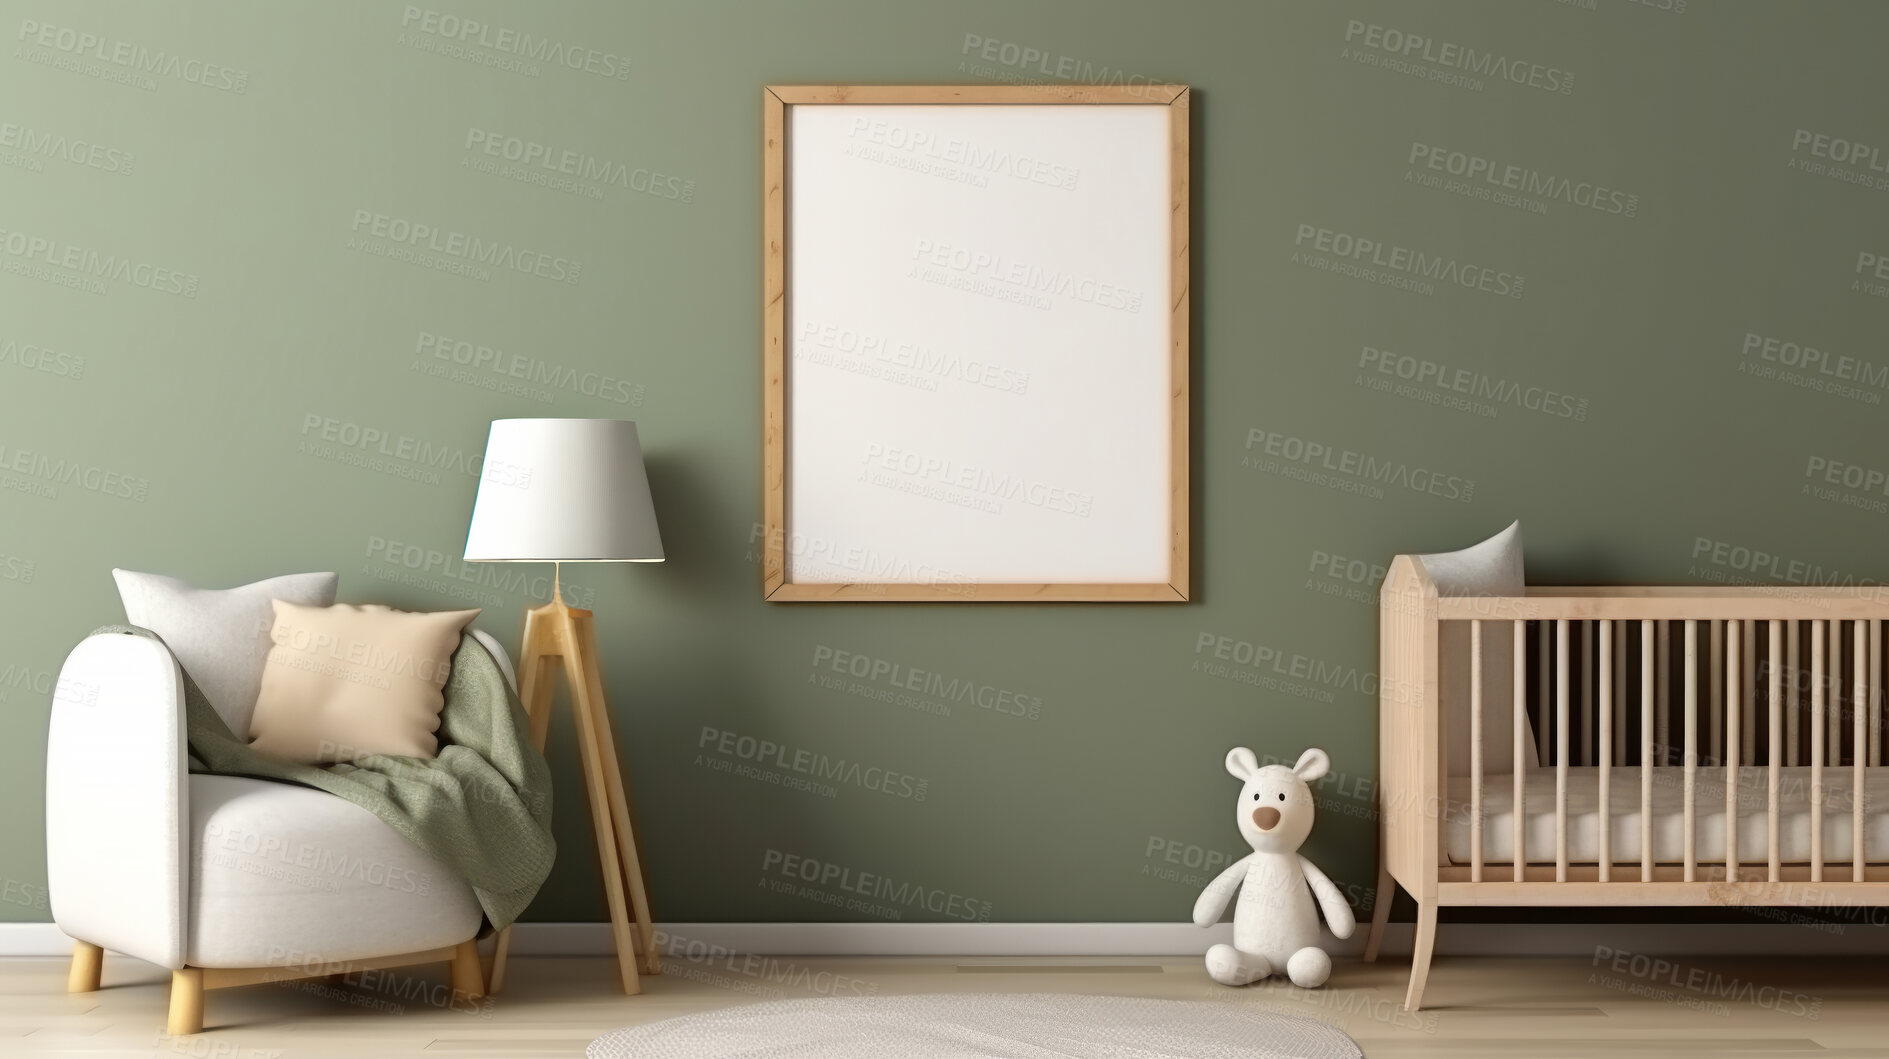 Buy stock photo Baby room, bed and home interior design with blank frame for apartment poster, picture and decoration. Cozy, modern and furniture mockup space for text, print and ideas for architecture inspiration